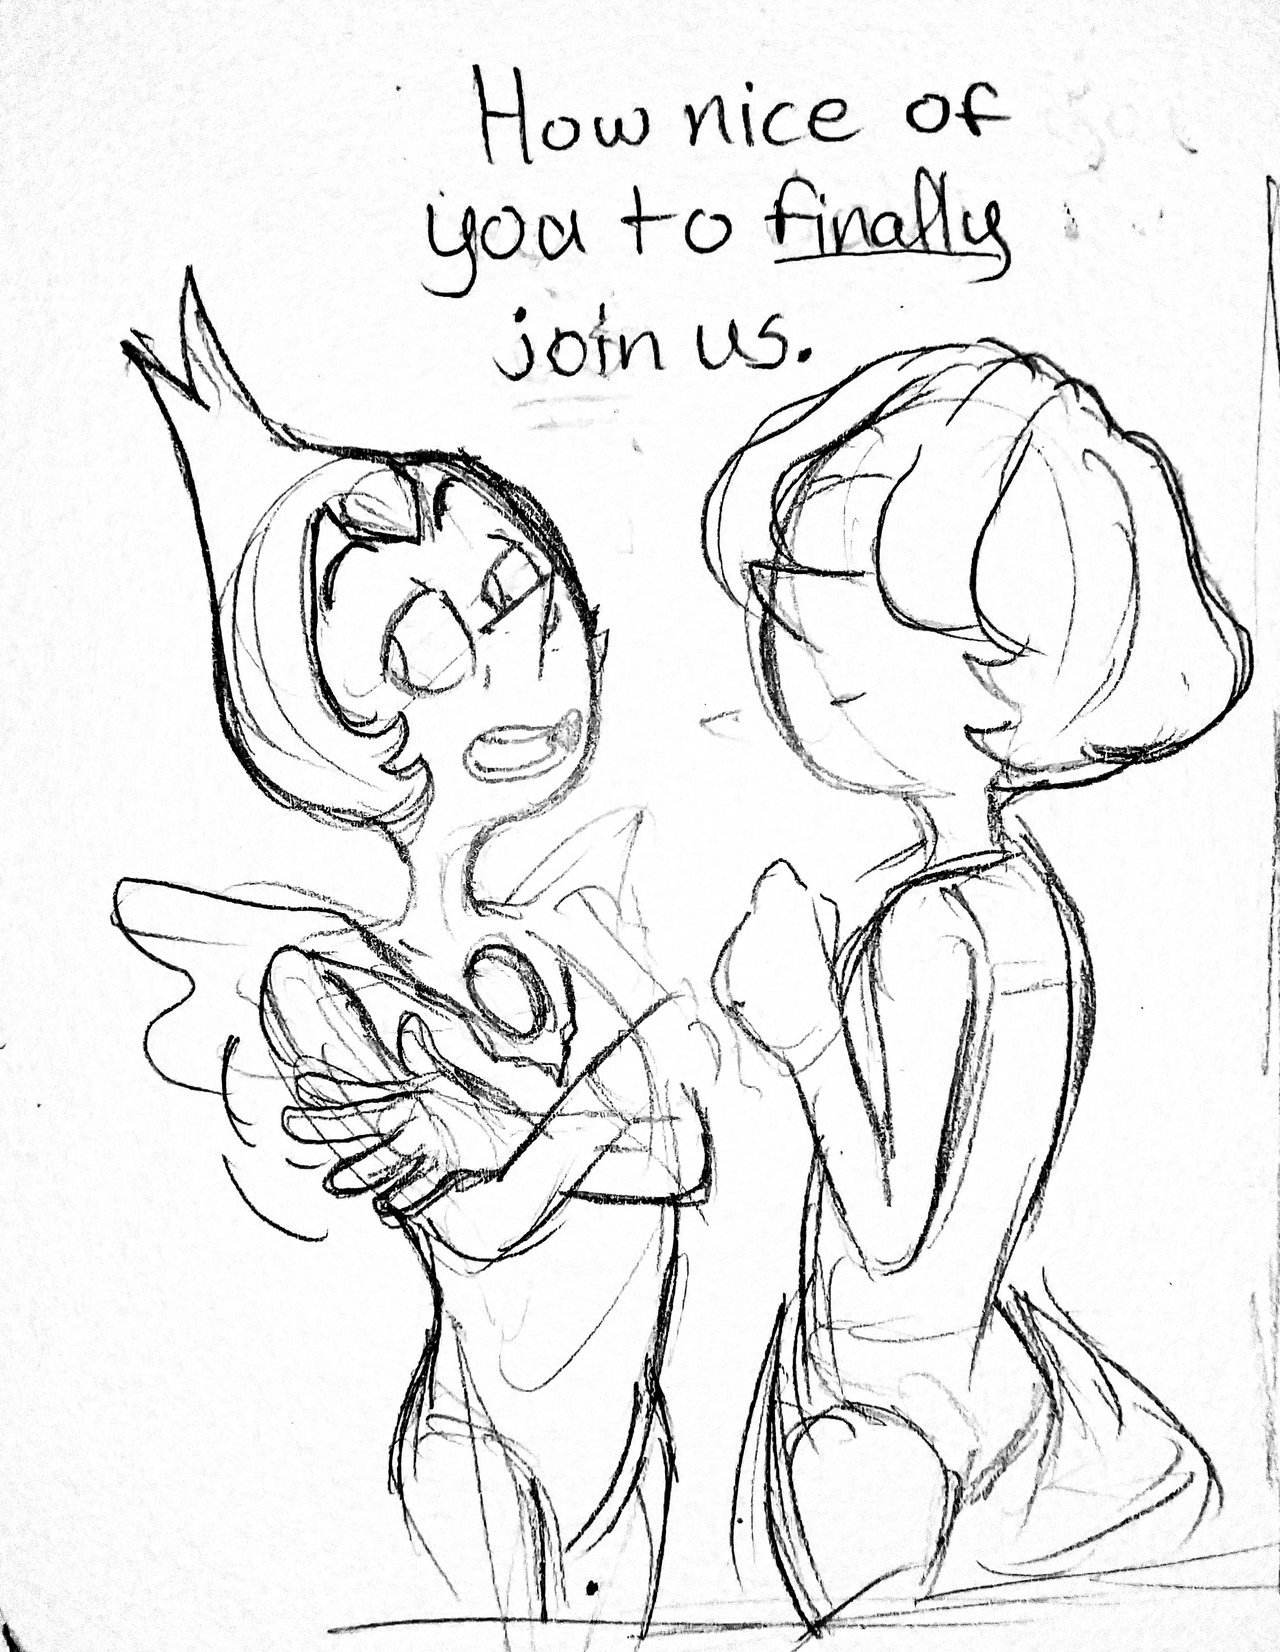 This week on episode premiere relevant sketches that I just didn’t upload. I drew these for A Single Pale Rose.